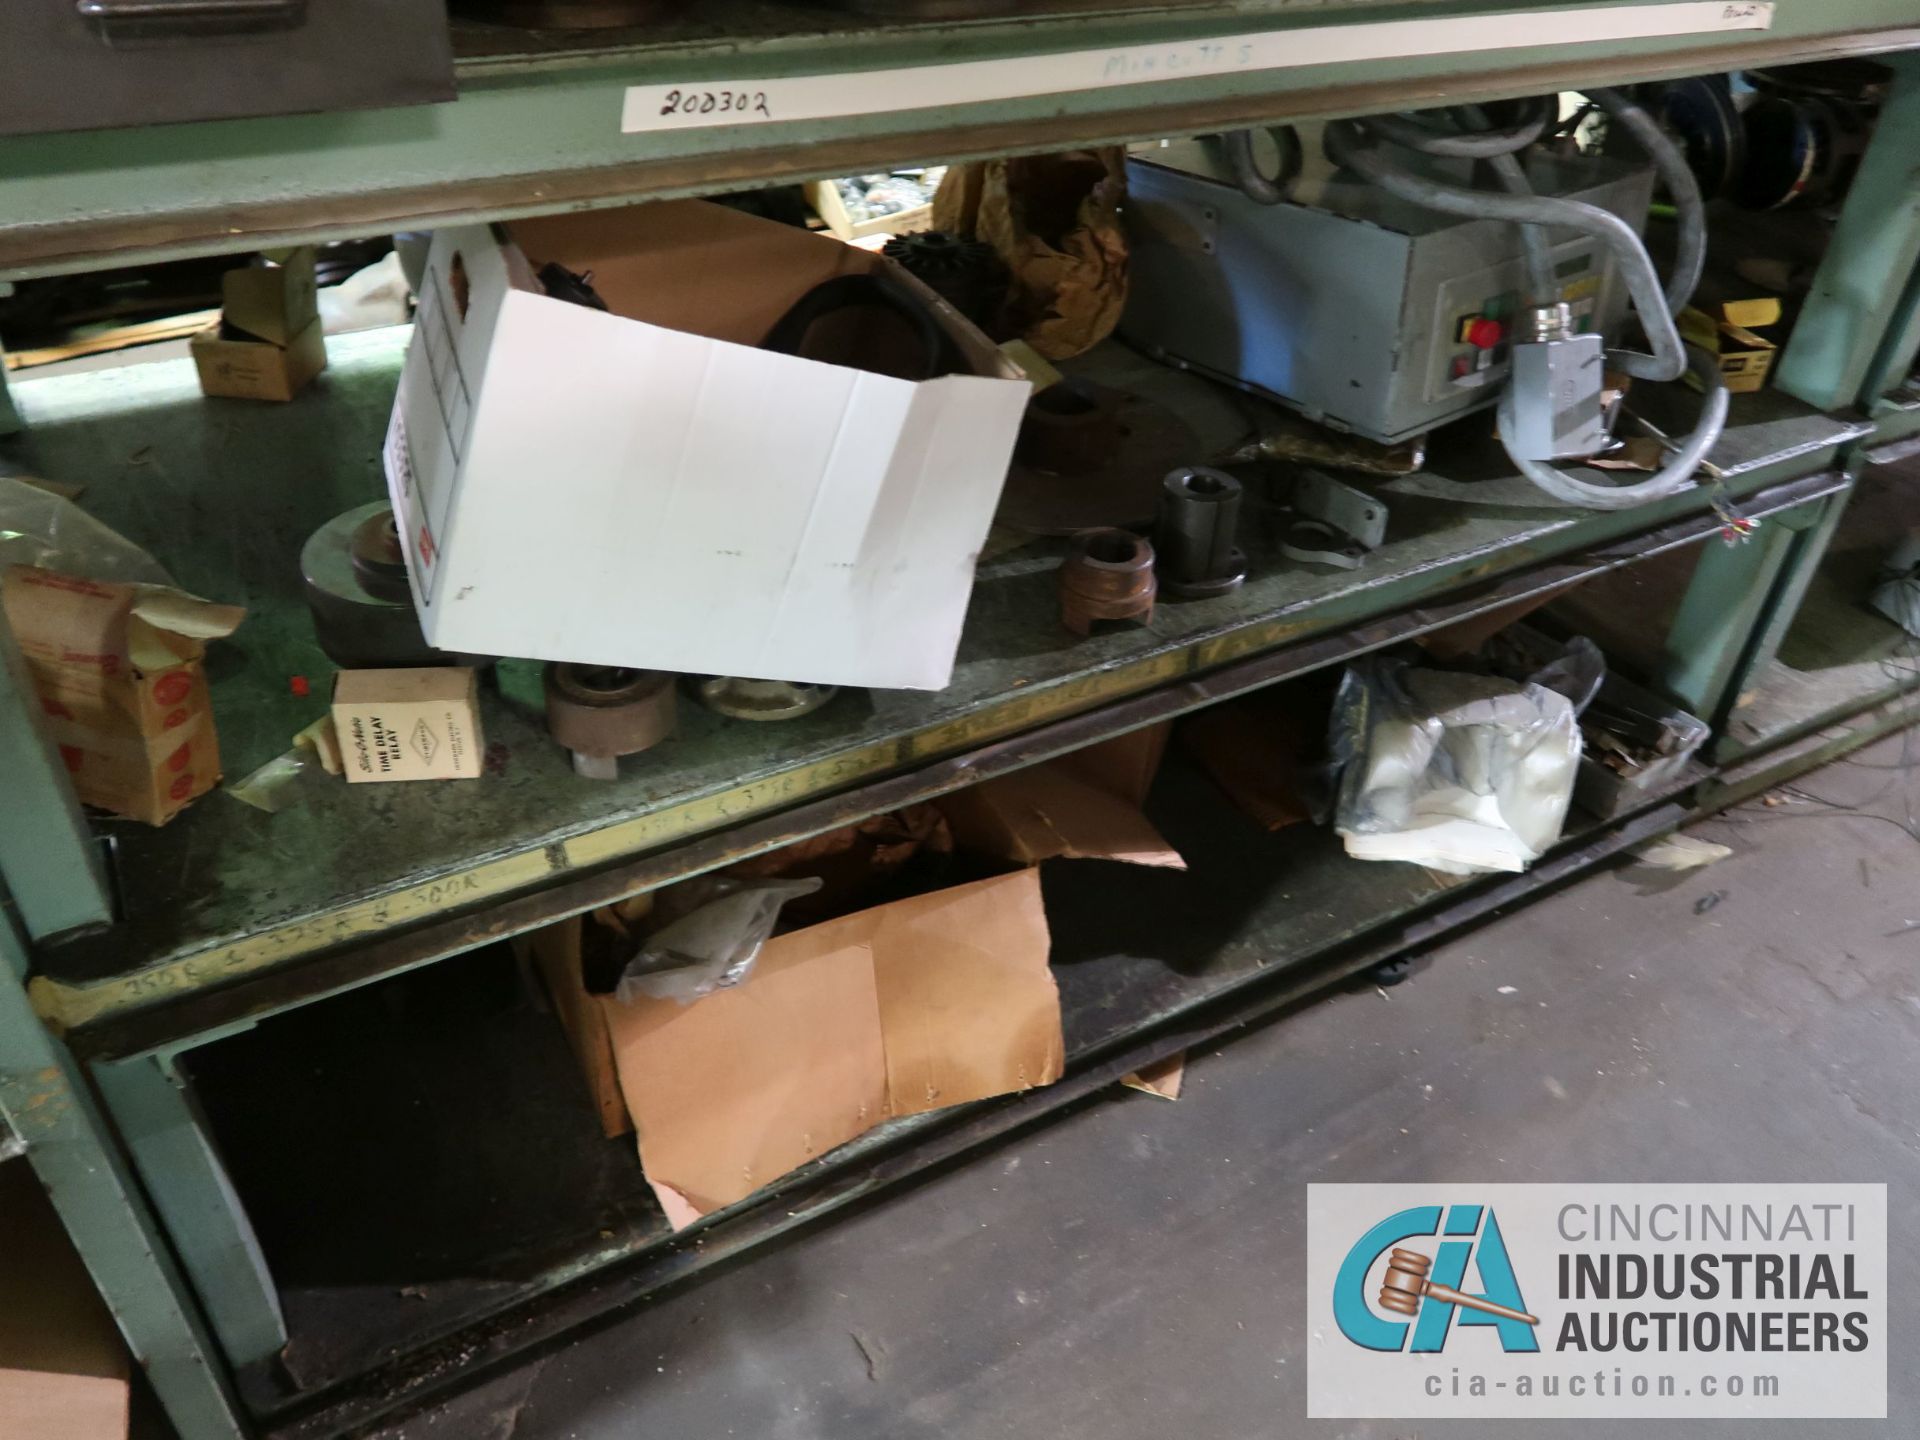 (LOT) MACHINE PARTS, COMPRESSORS, REDUCERS, GEARS, MOTORS, AND OTHER (4) SECTIONS RACK - Image 24 of 28